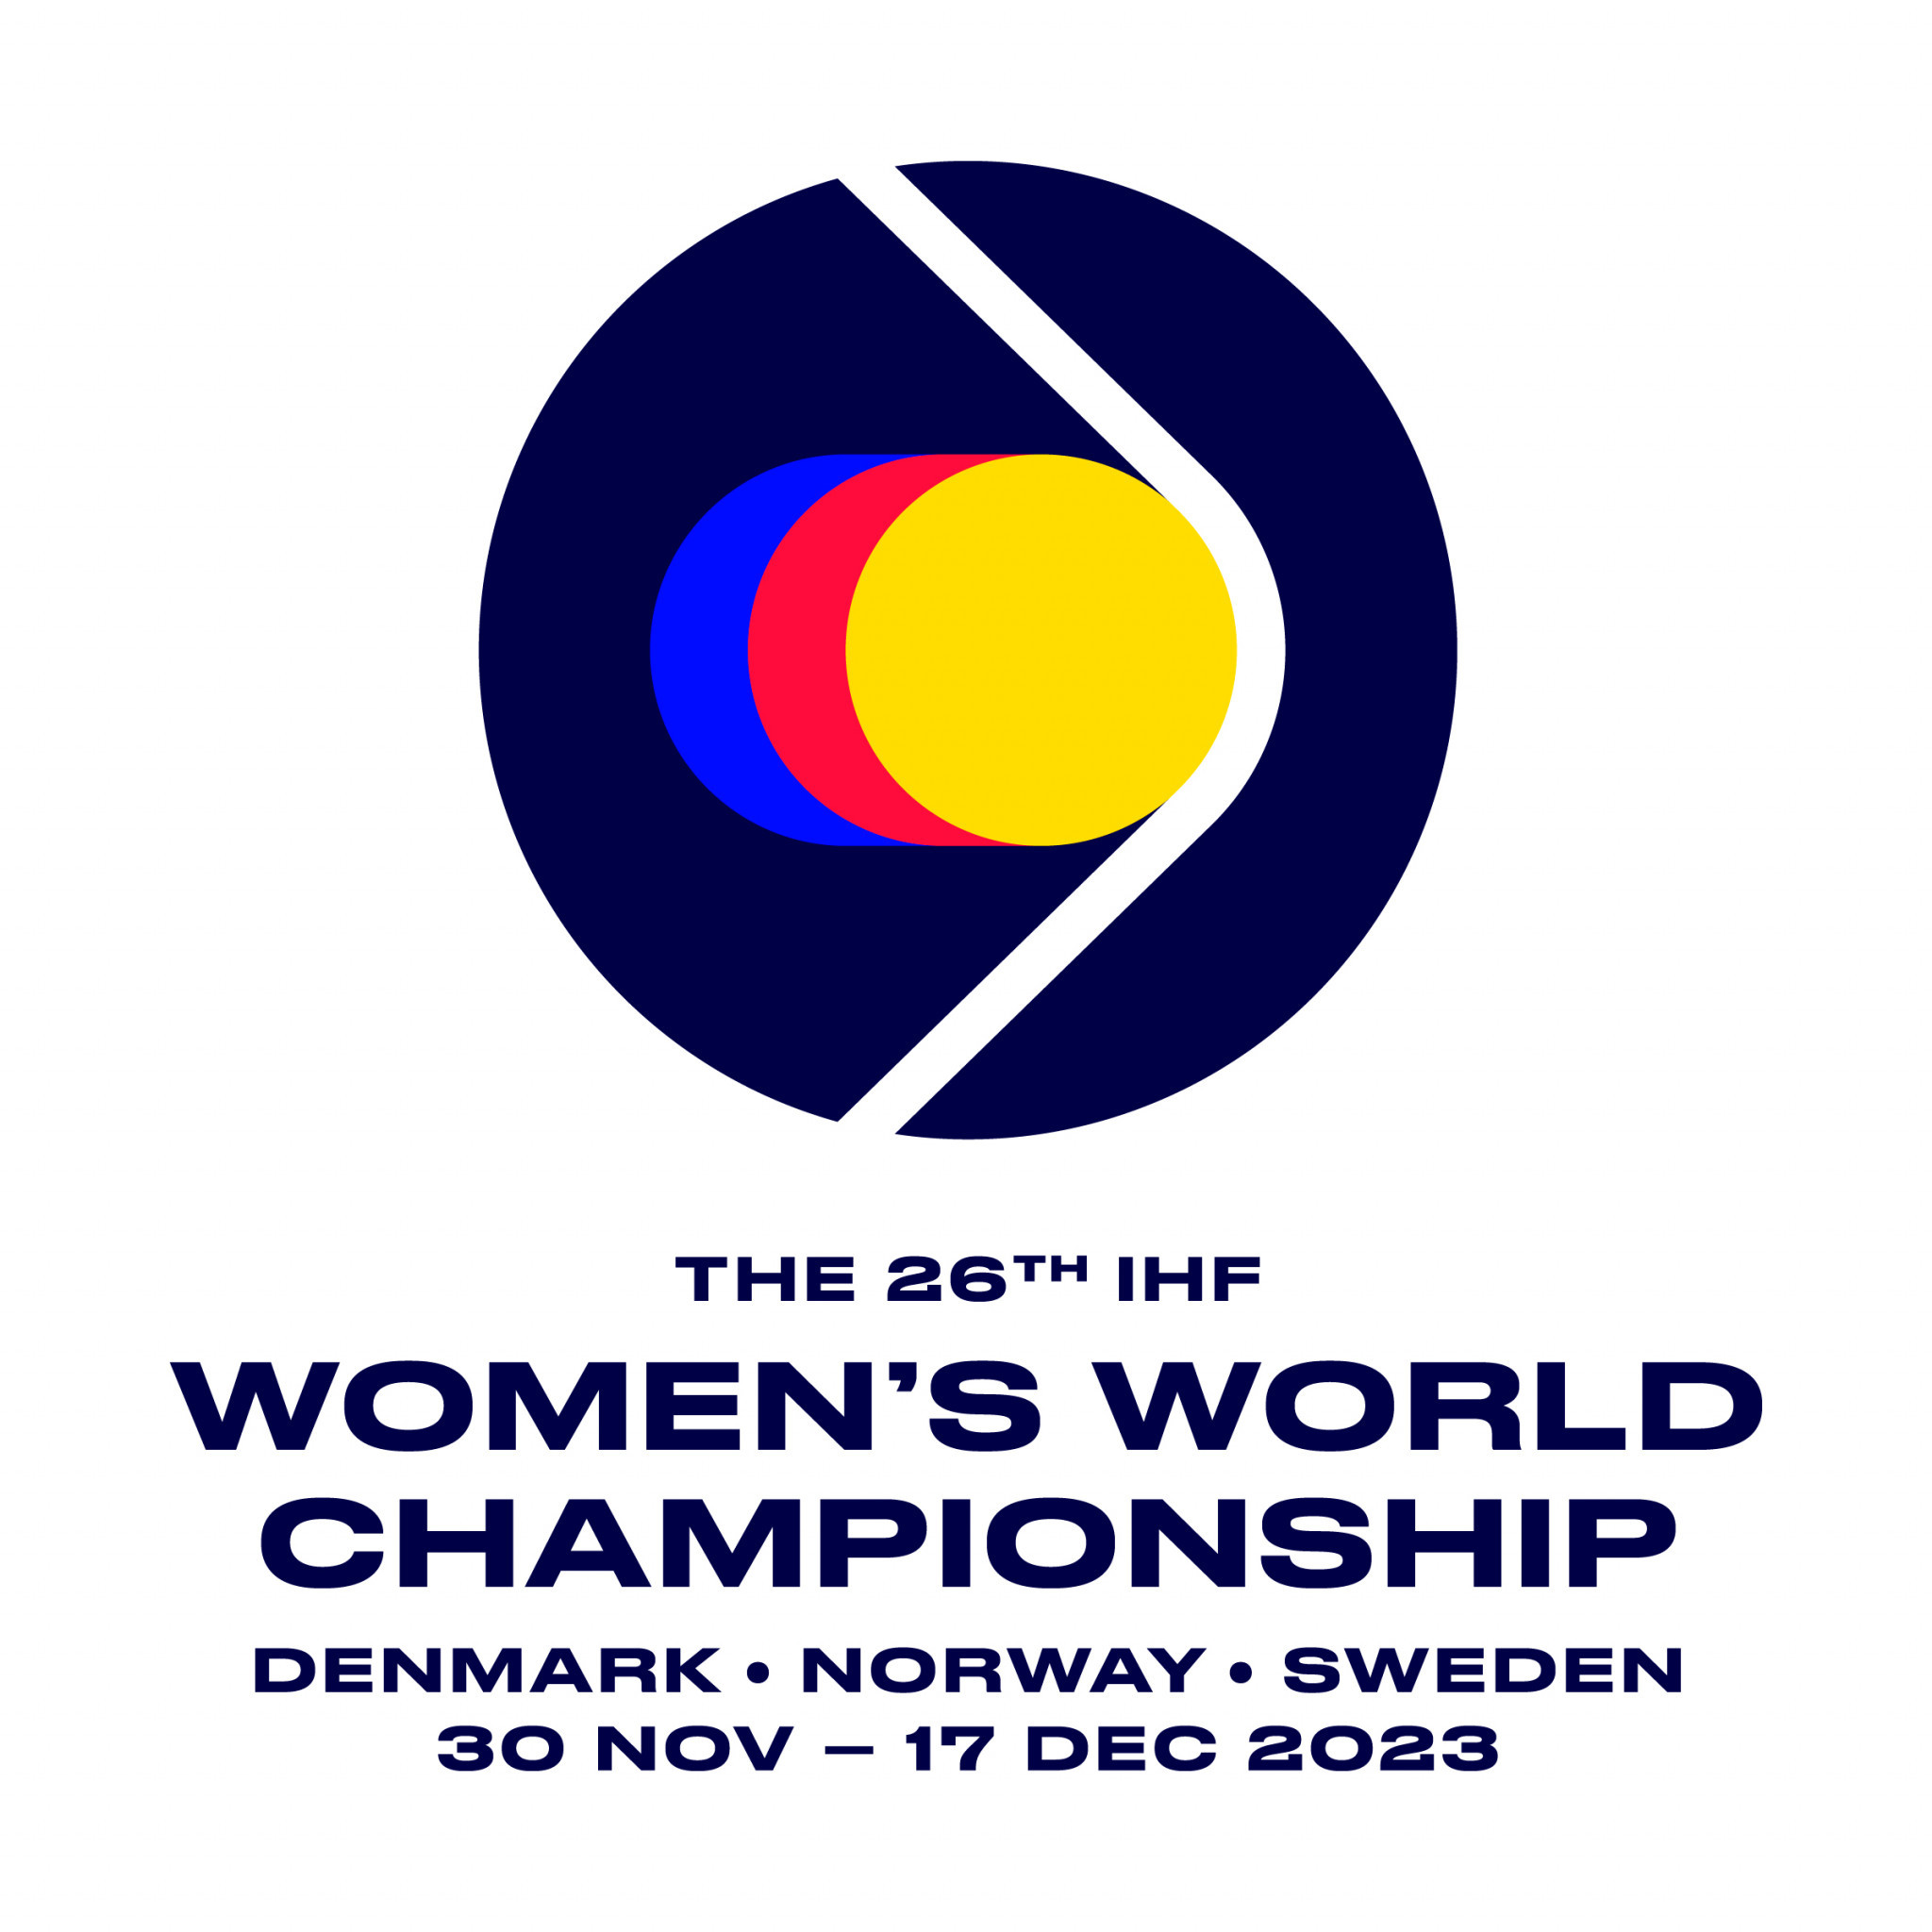 The logo for the IHF Women's World Championship ©IHF